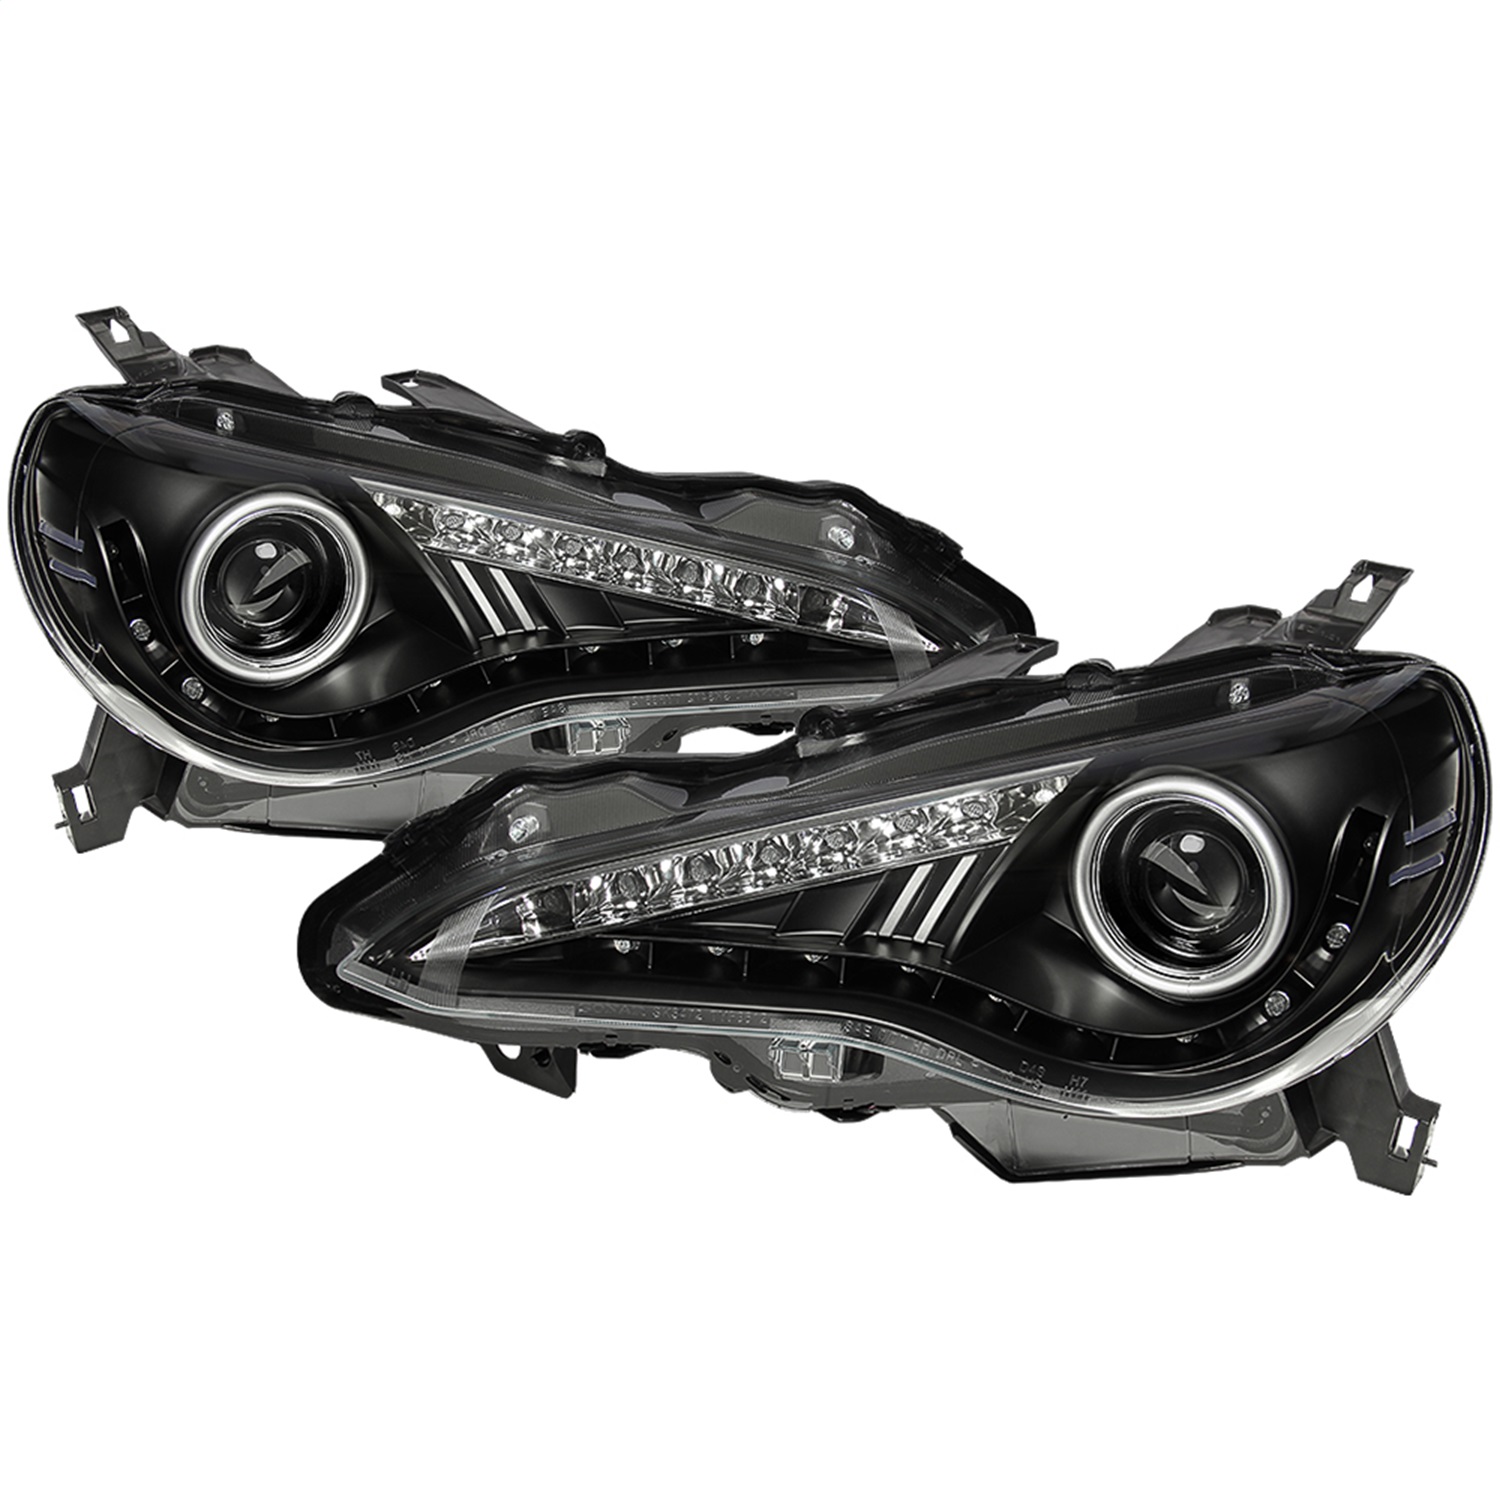 Spyder Auto 5075413 DRL LED Projector Headlights Fits 13-14 FR-S